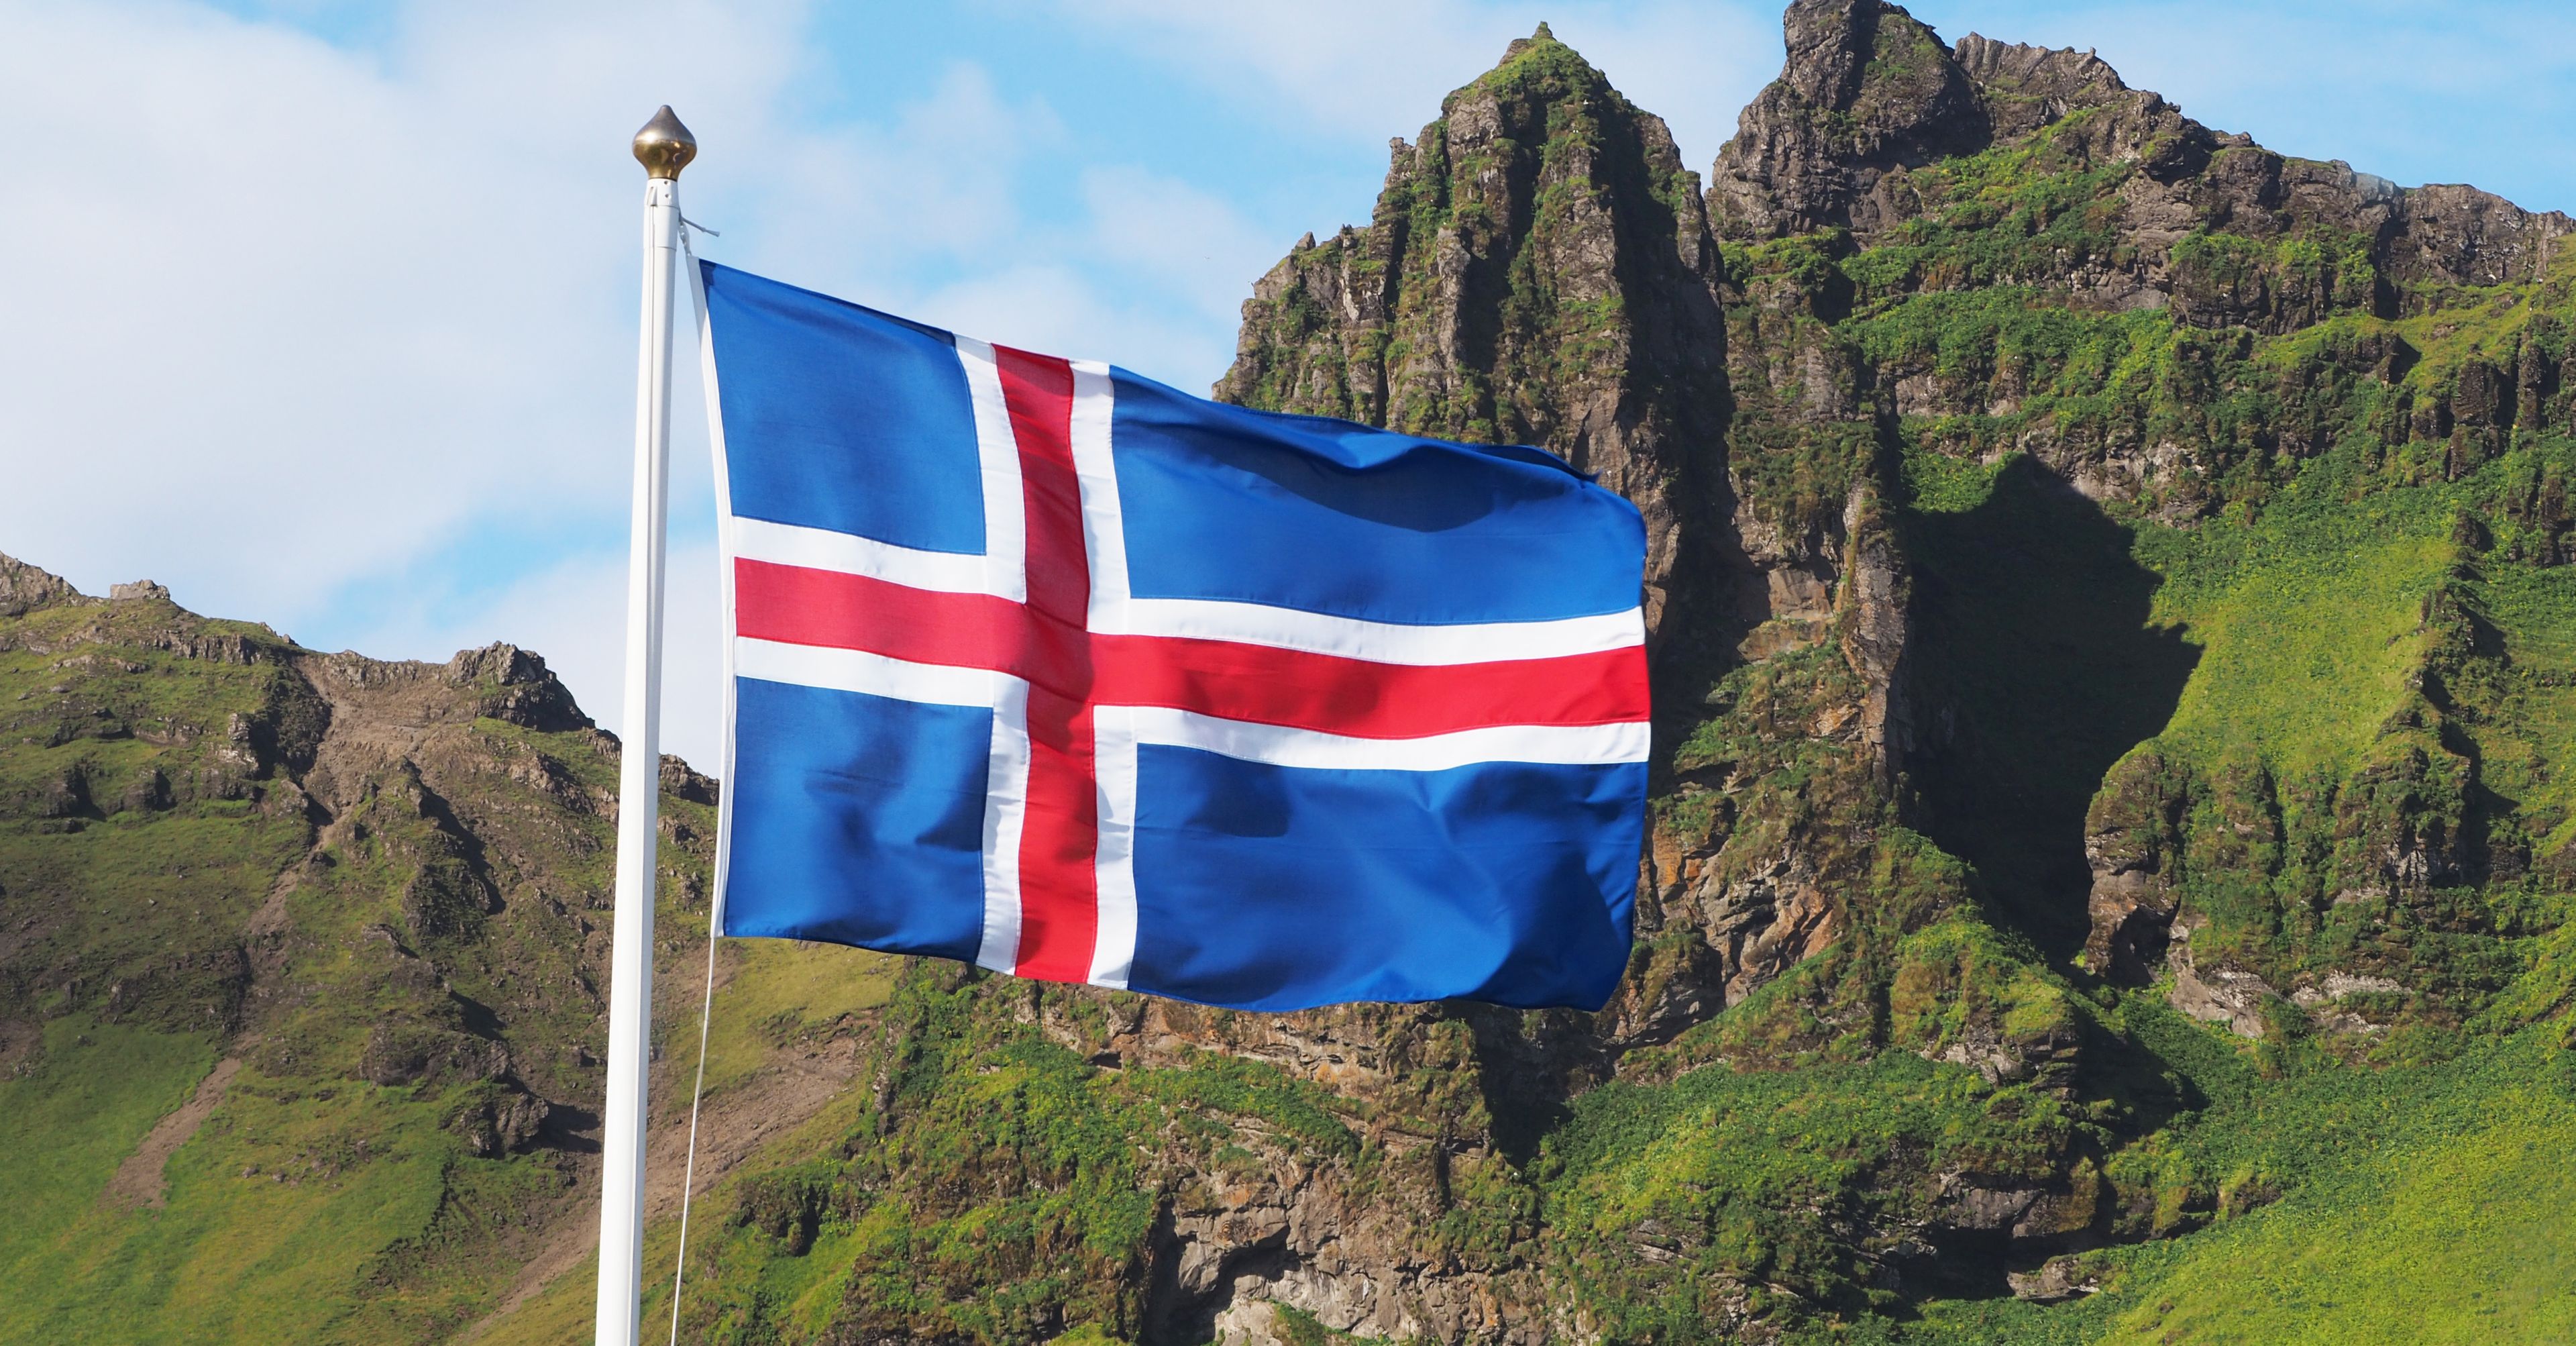 Flag and a question, what language do they speak in iceland?